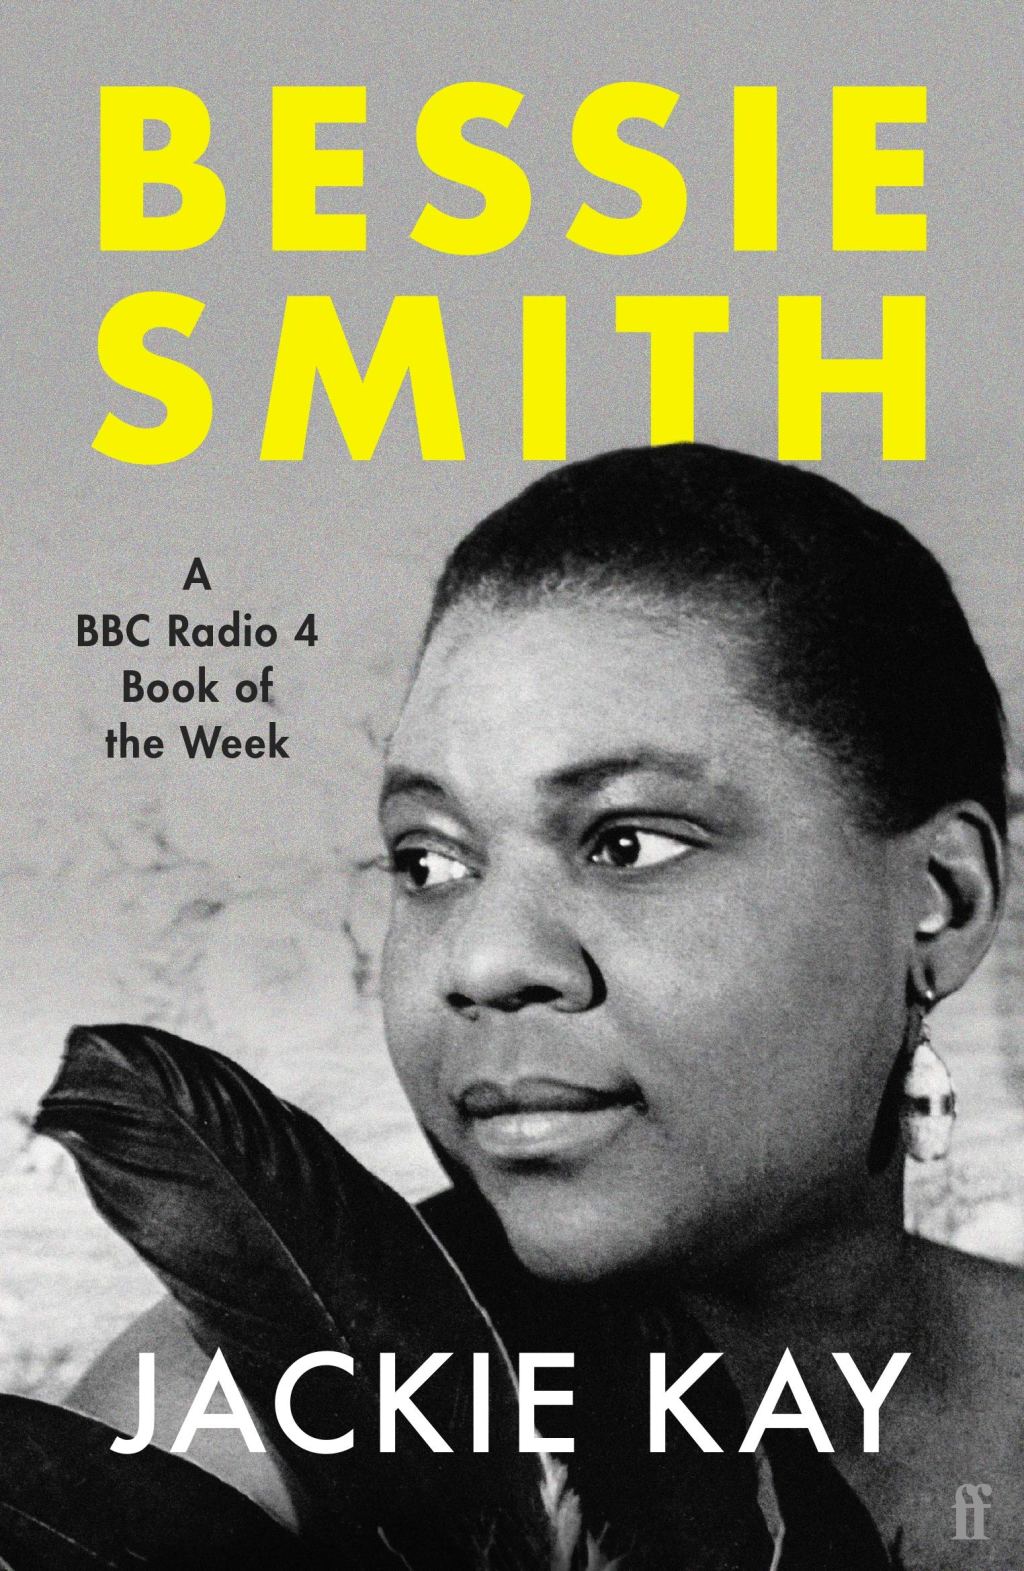 On February 18, Kay’s book on her idol – titled, simply, Bessie Smith – will be republished with a new introduction.